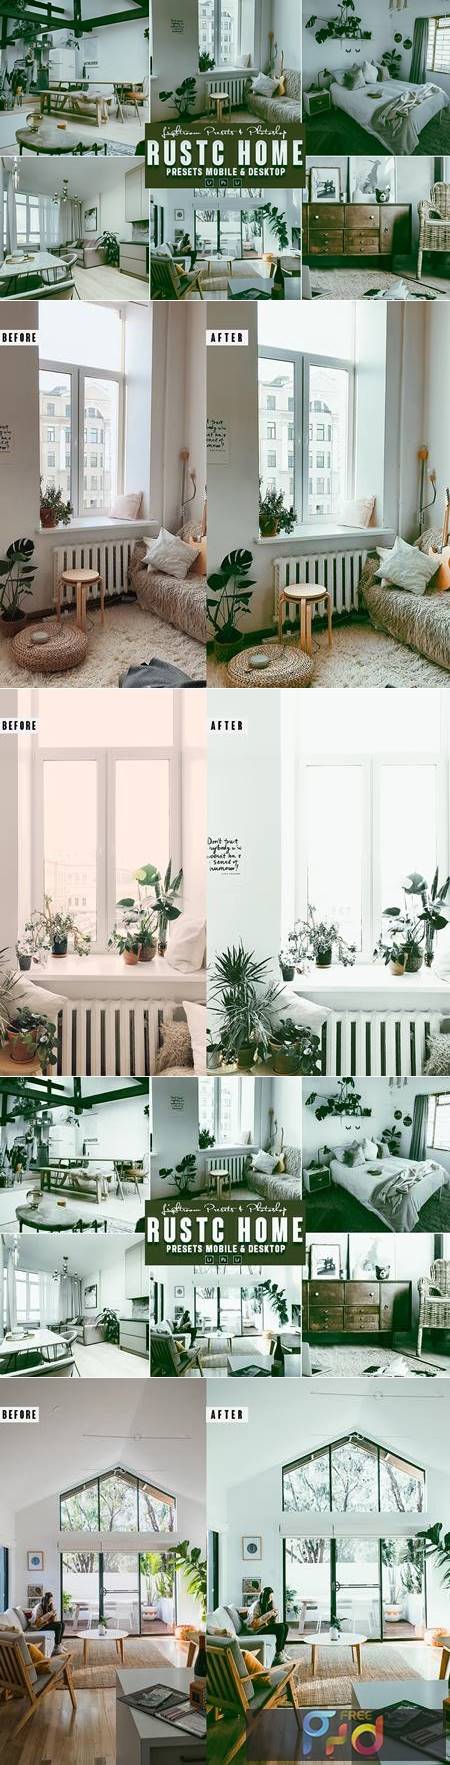 Rustic Home Photoshop Action & Lightrom Presets AXZVJNV 1